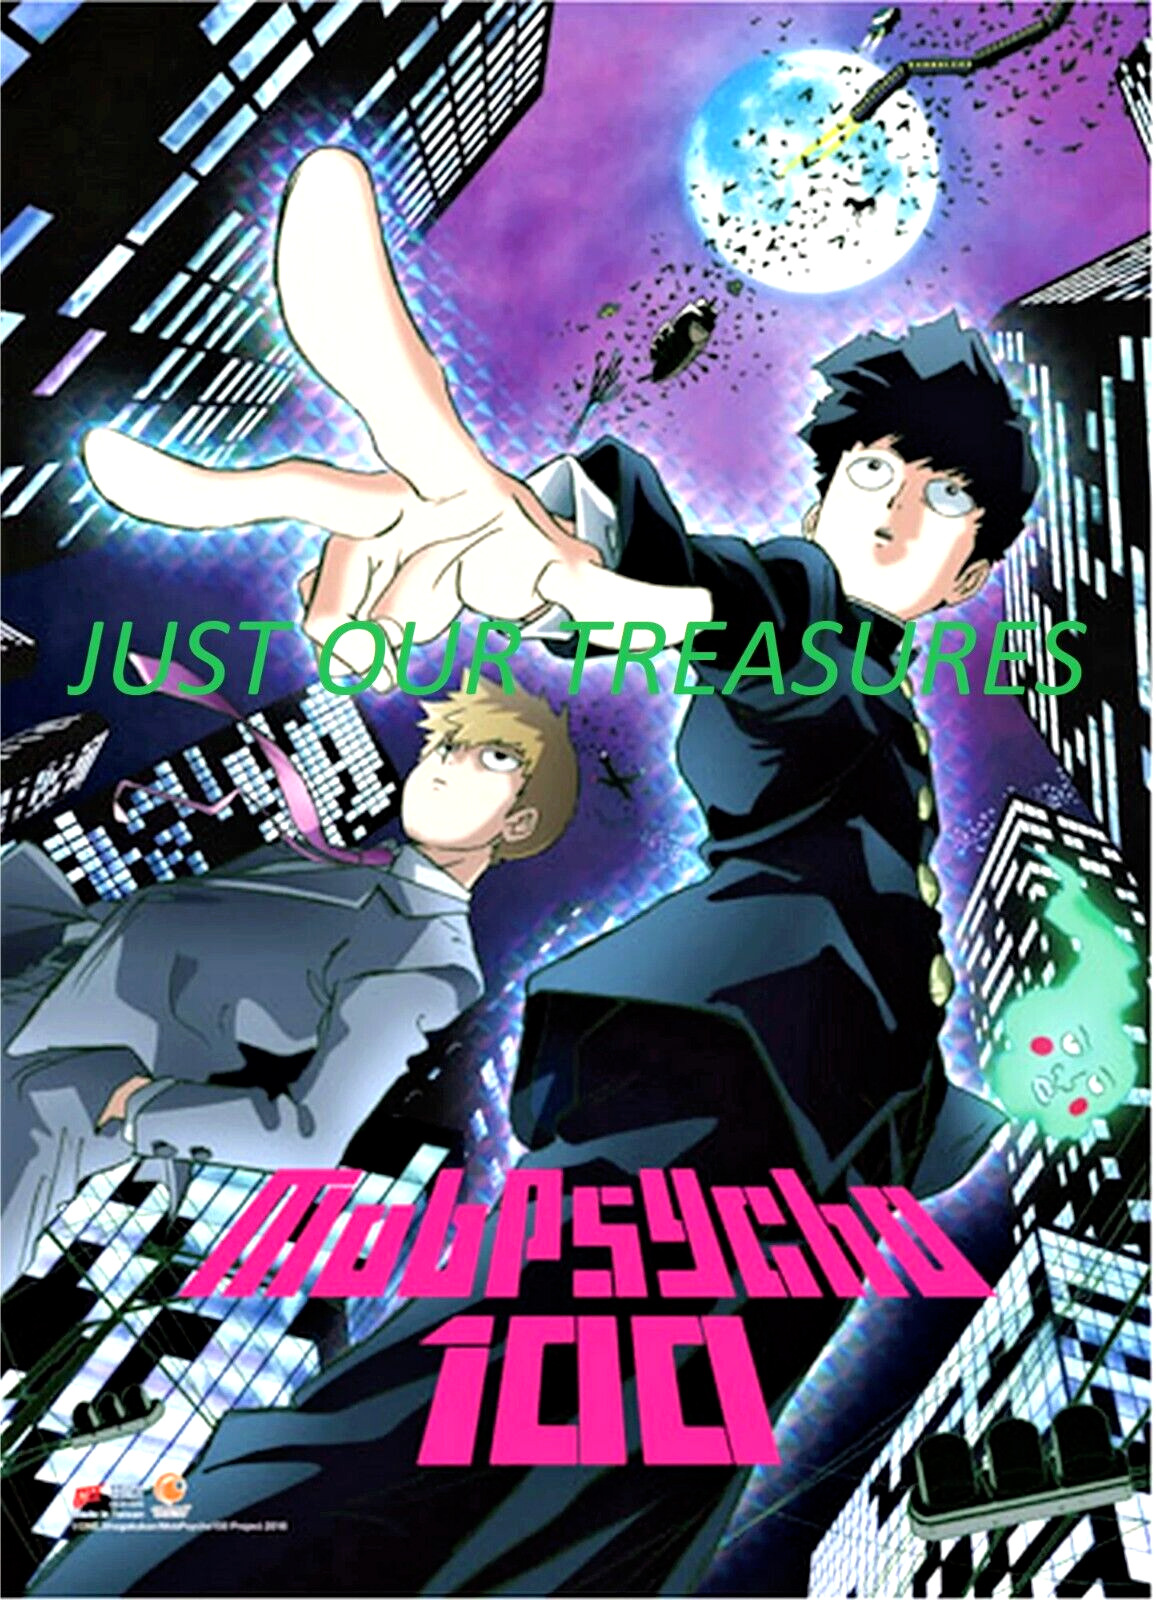 MOB PSYCHO 100 S1 -KEY ART #1, LARGE WALL SCROLL POSTER (OFFICIAL GEE) **NEW**